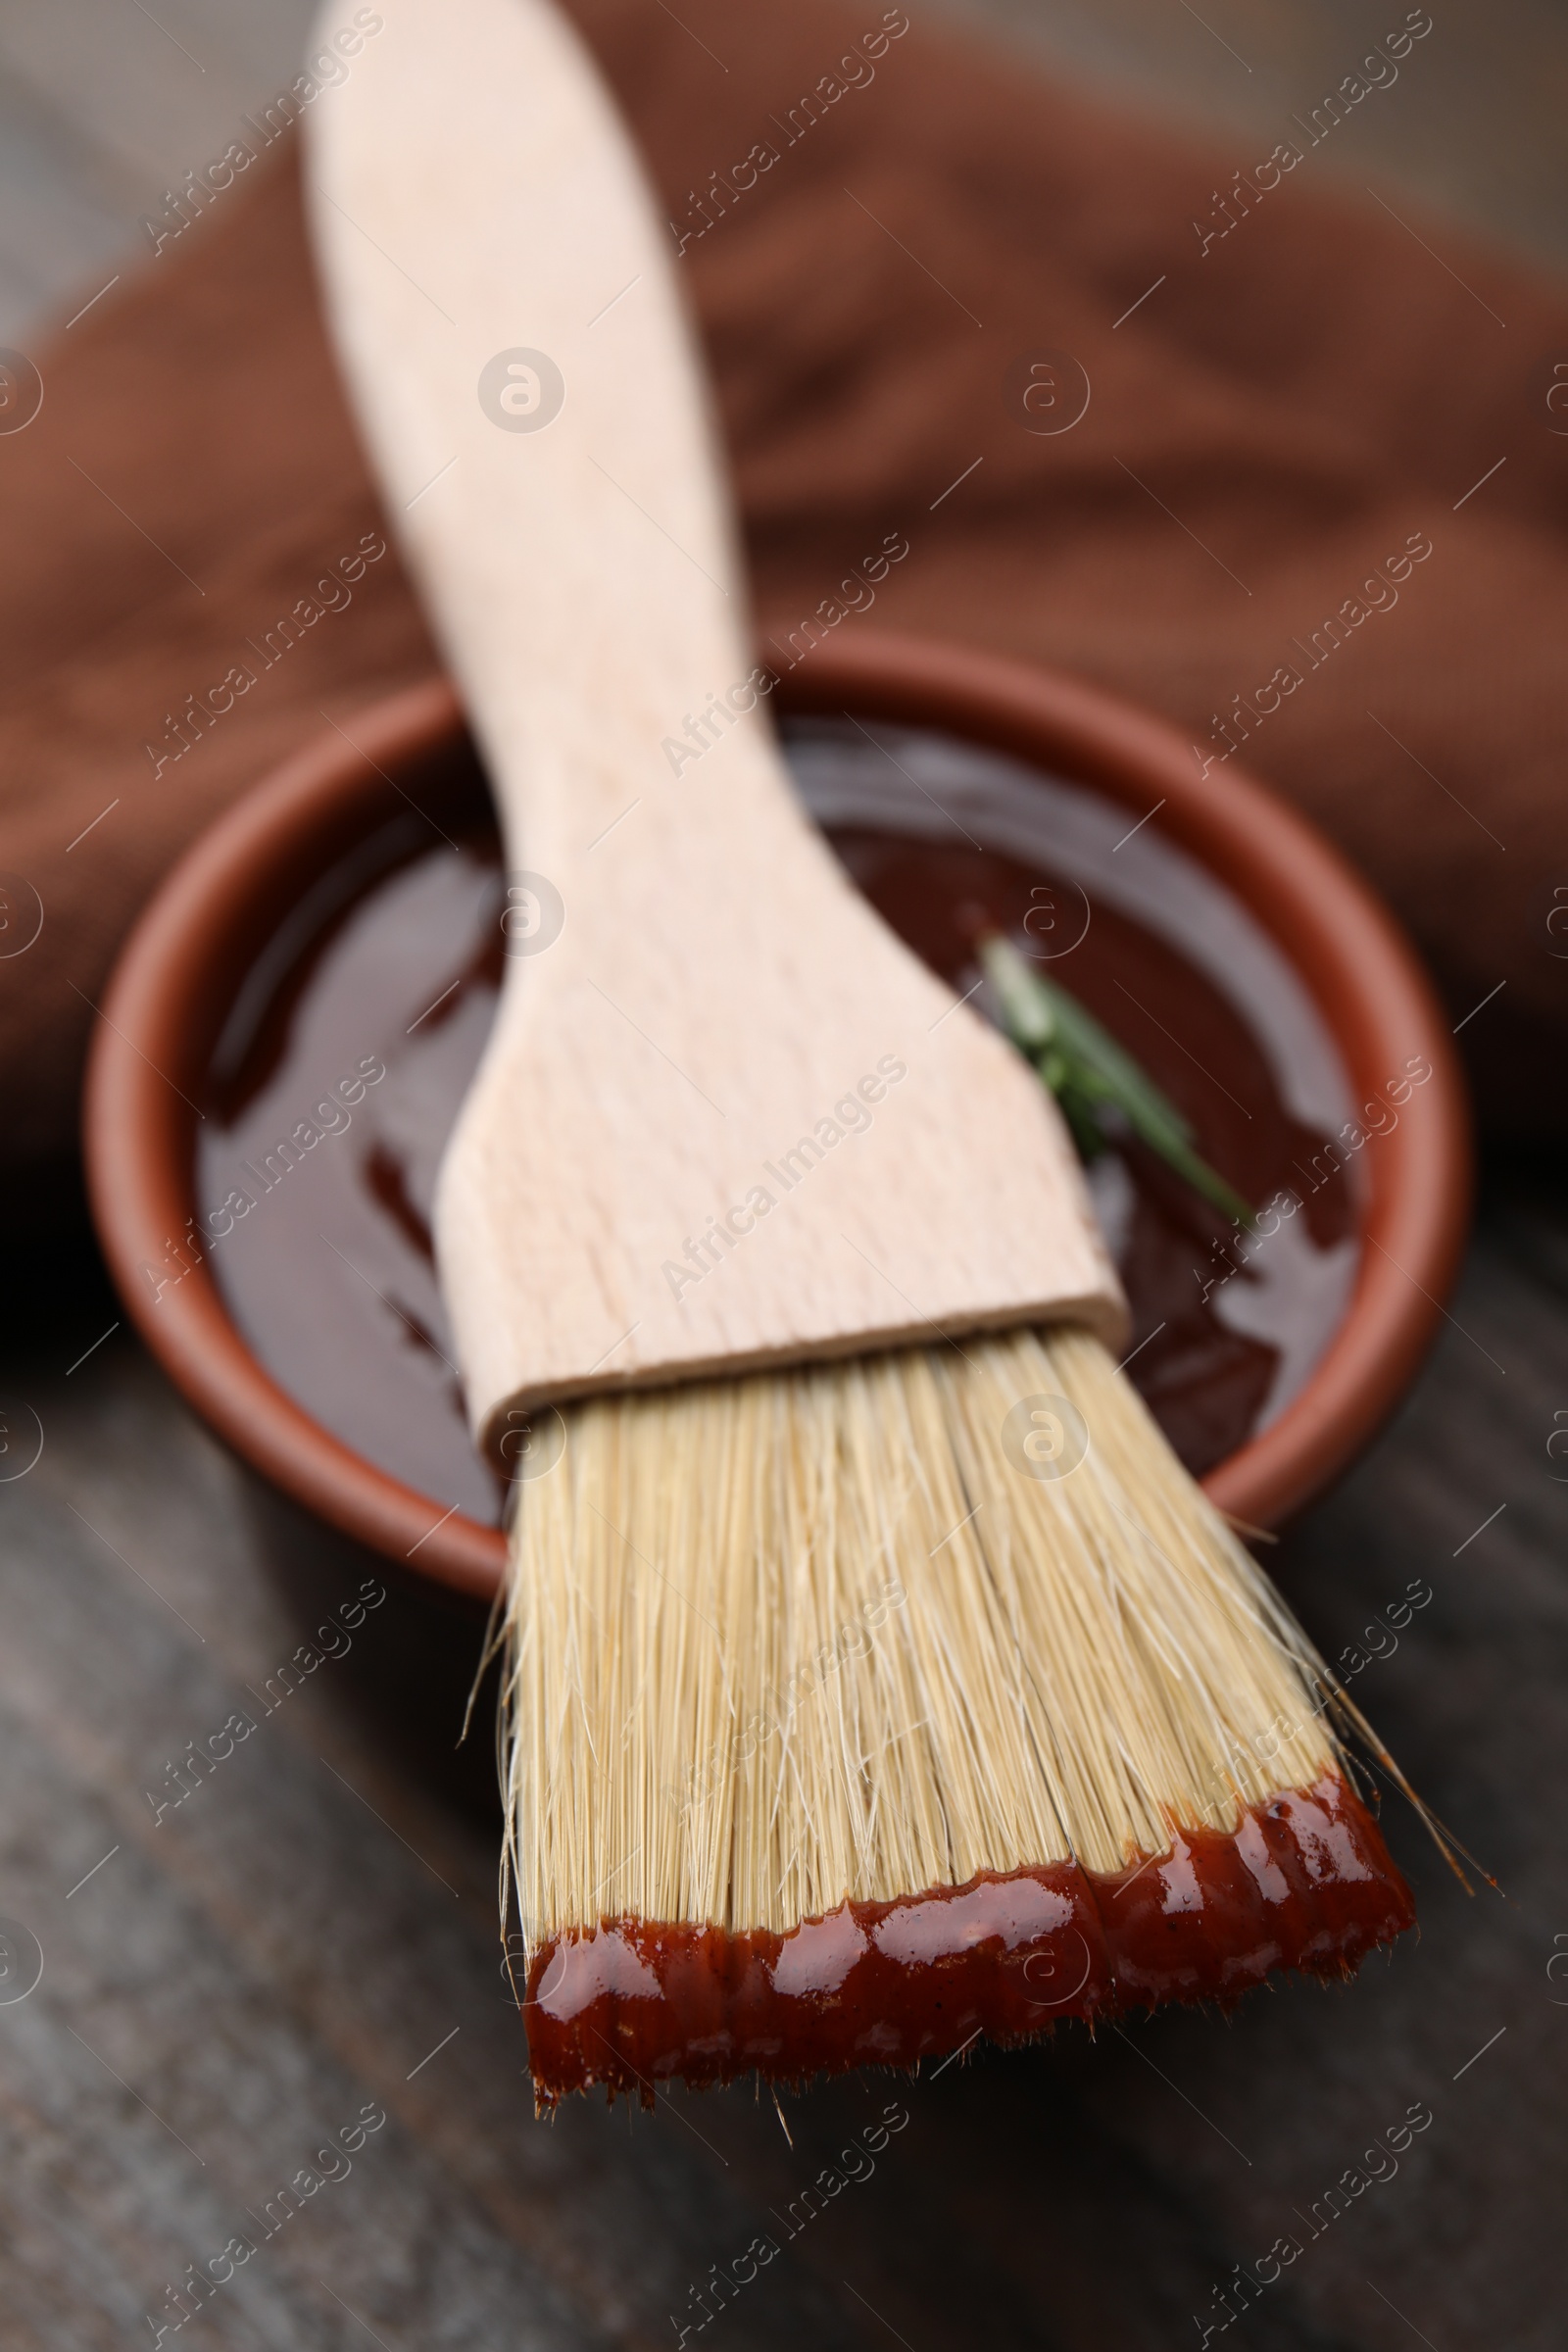 Photo of Marinade in bowl and basting brush on table, closeup